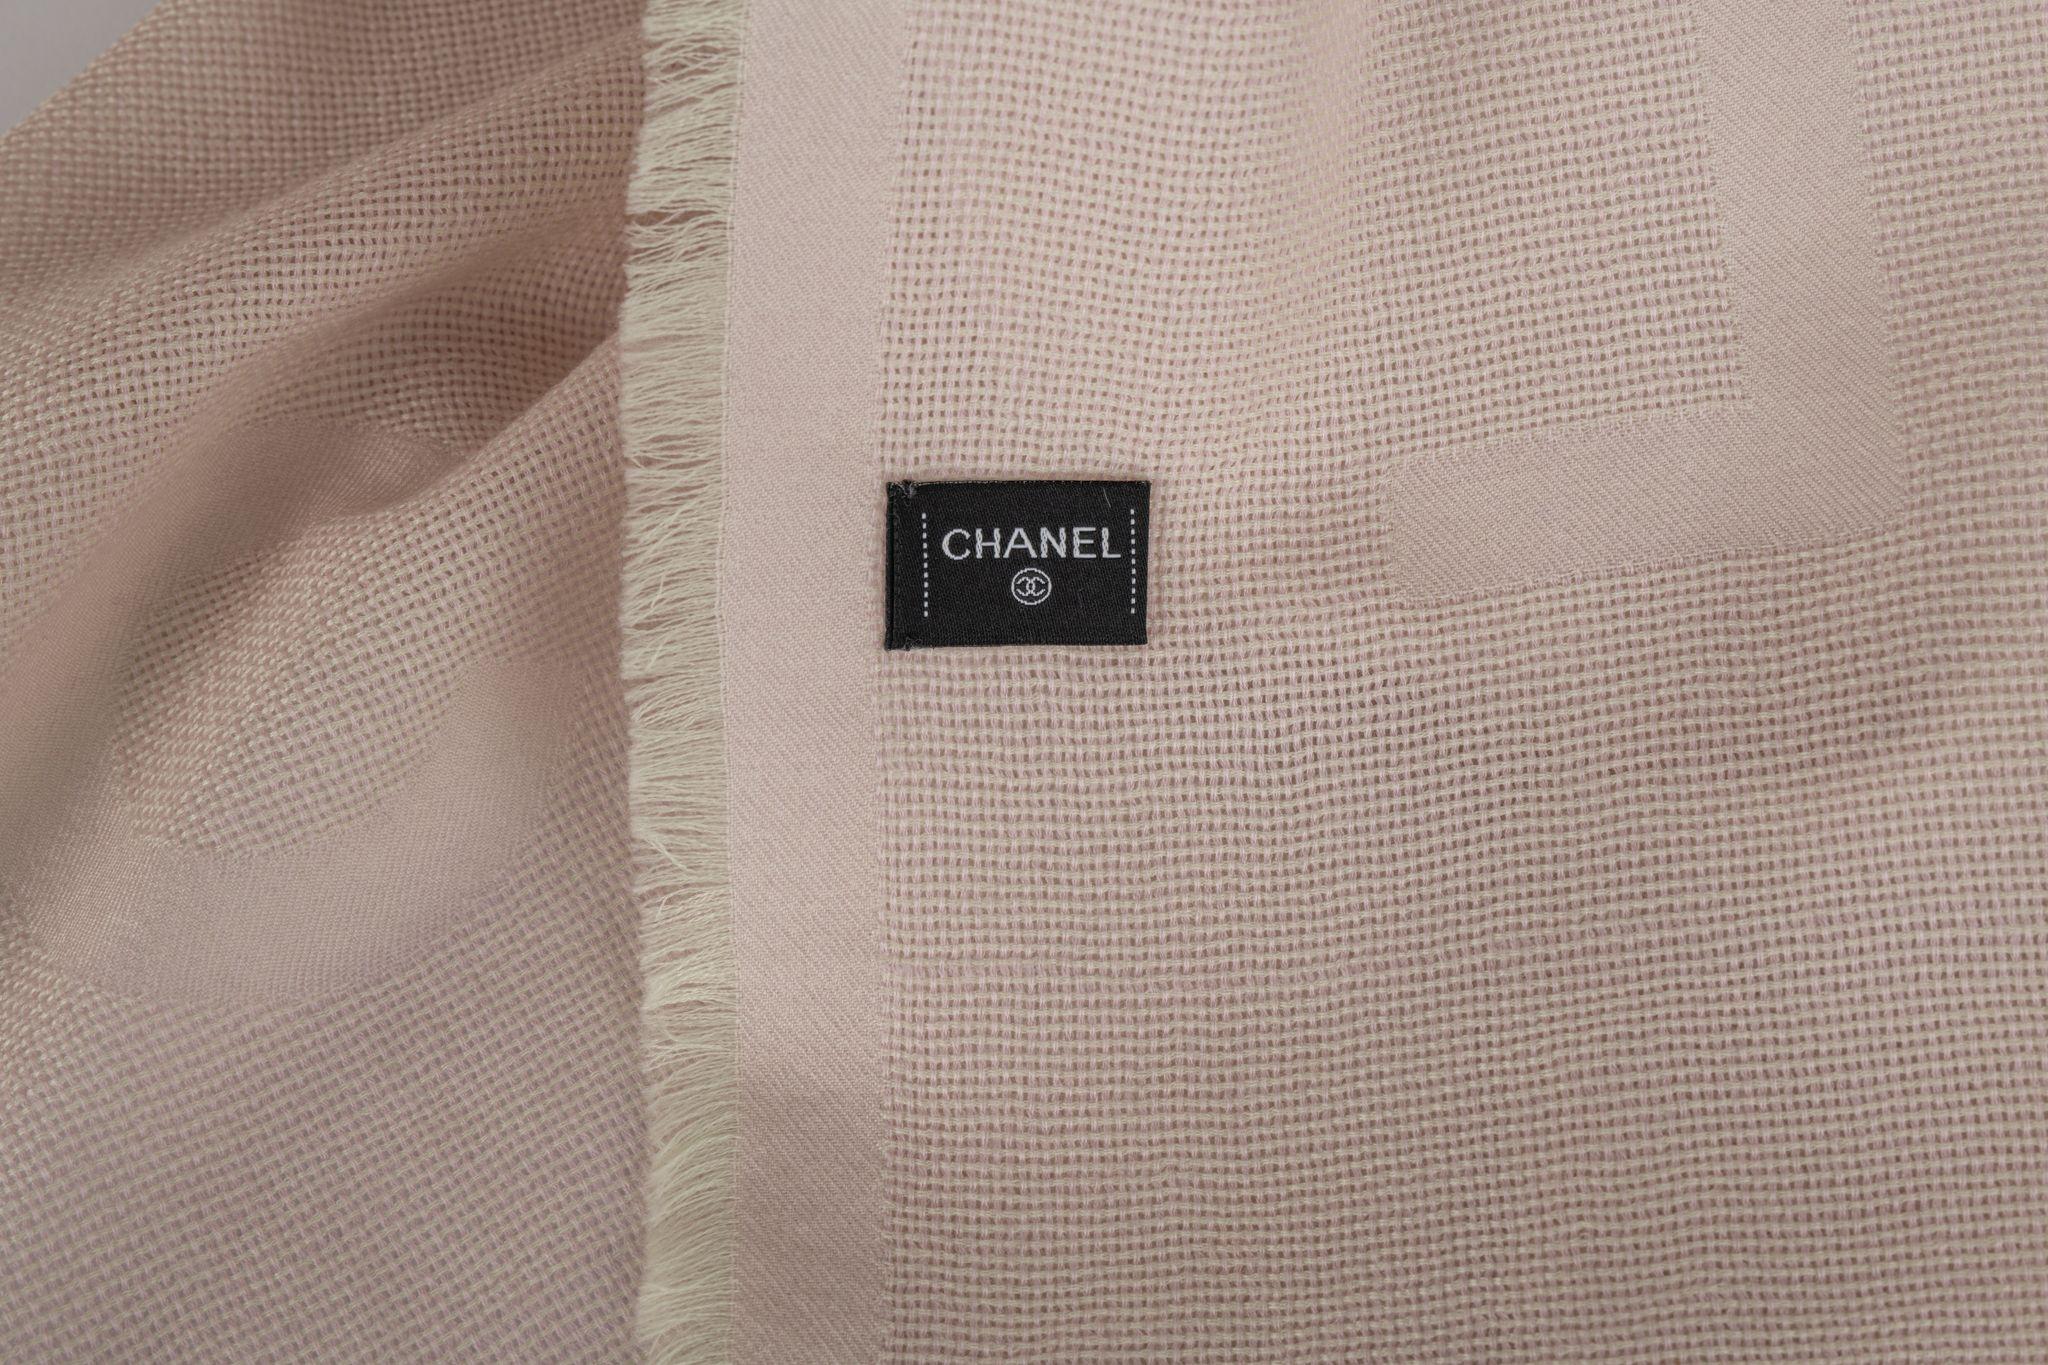 Chanel Cashmere Shawl in powder pink. The pattern features one big CC logo and it's also Chanel written on the scarf. The item is in new condition.